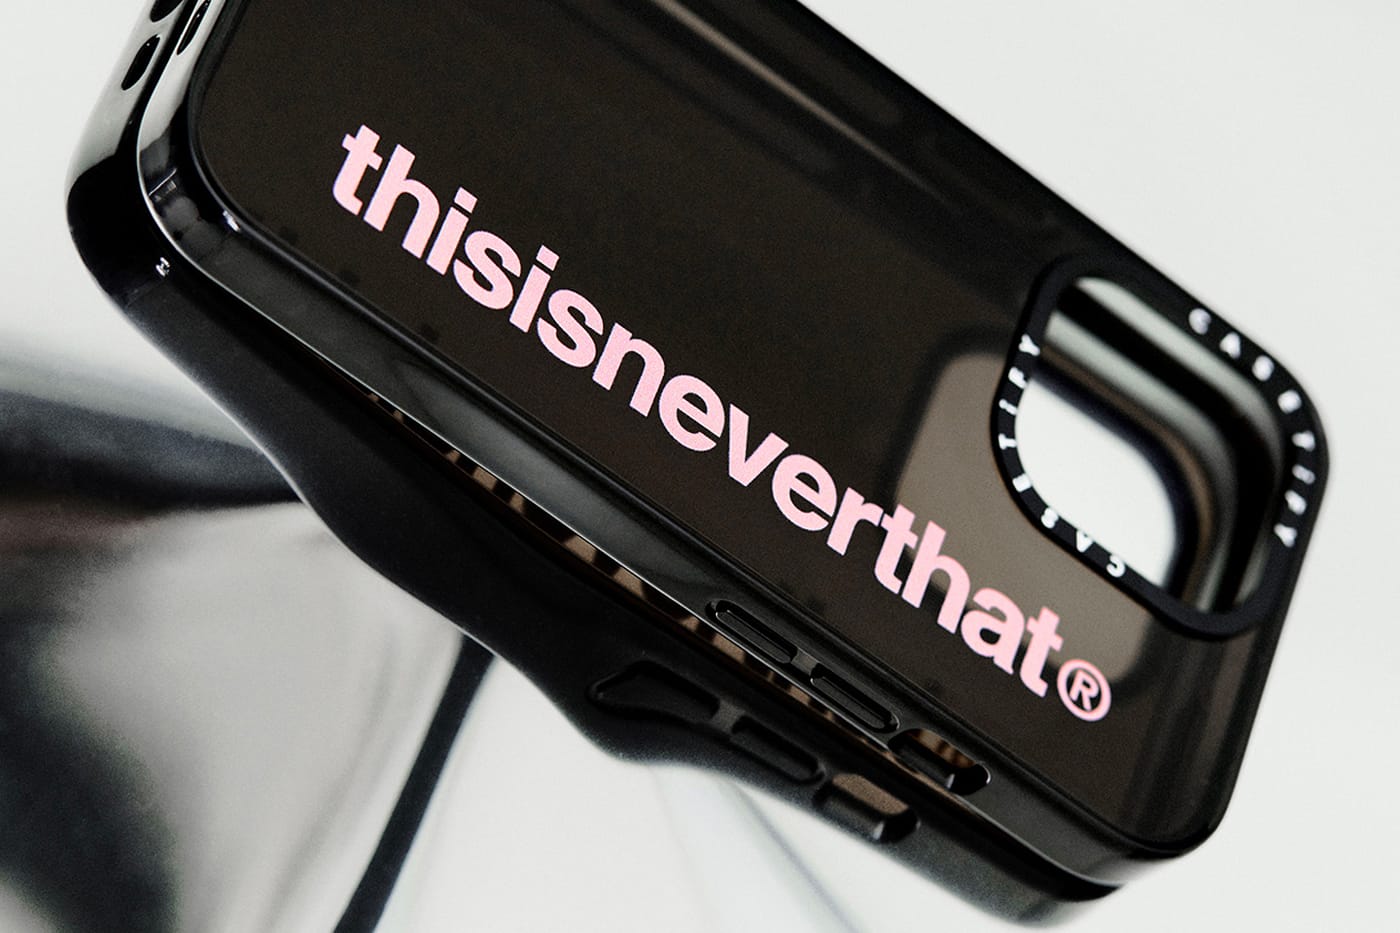 thisisneverthat® x CASETiFY Collab Release Info | Hypebeast